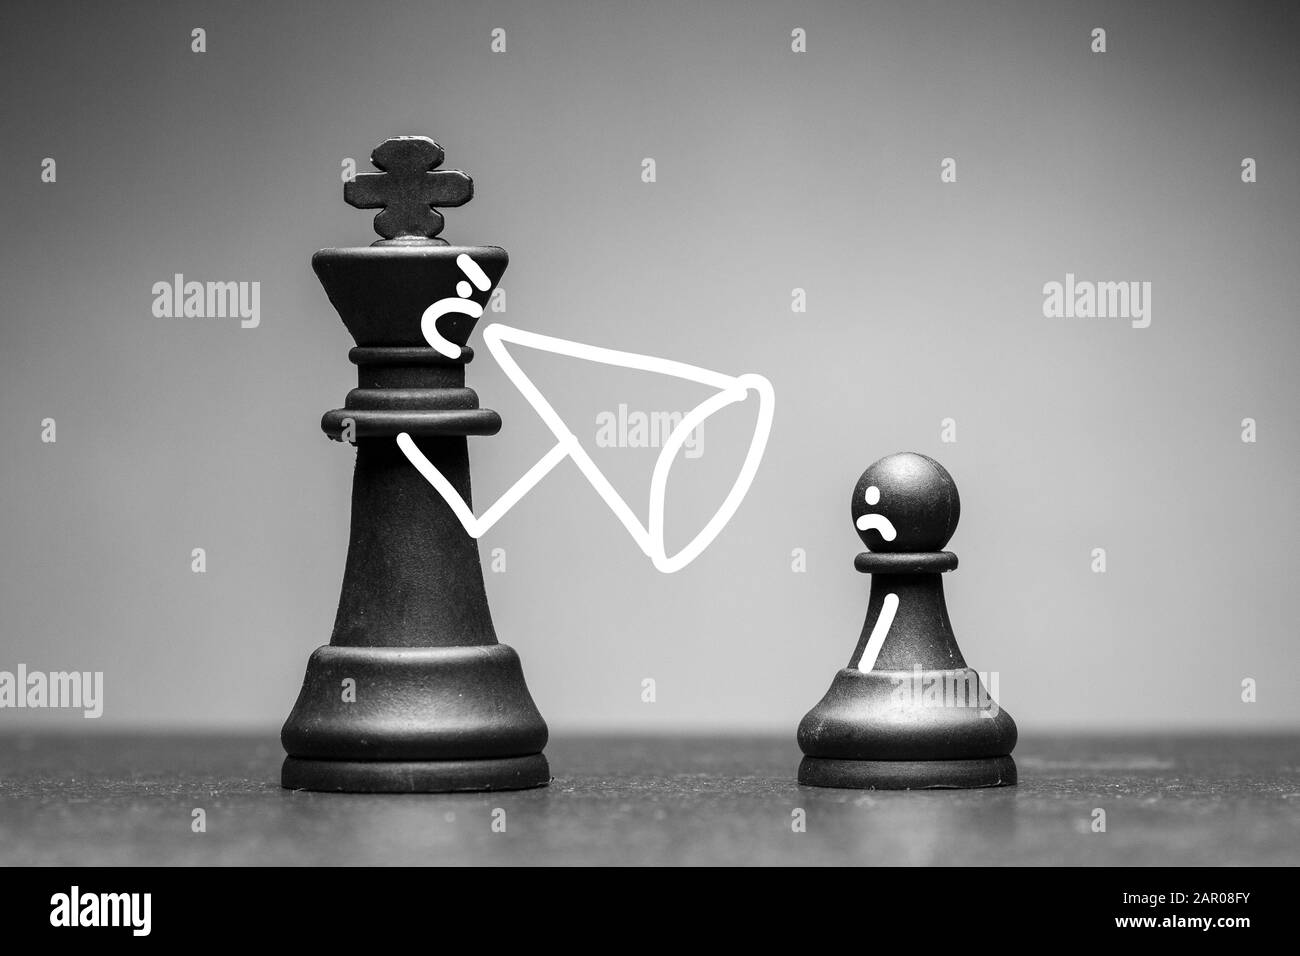 King chess piece yelling at a pawn Stock Photo